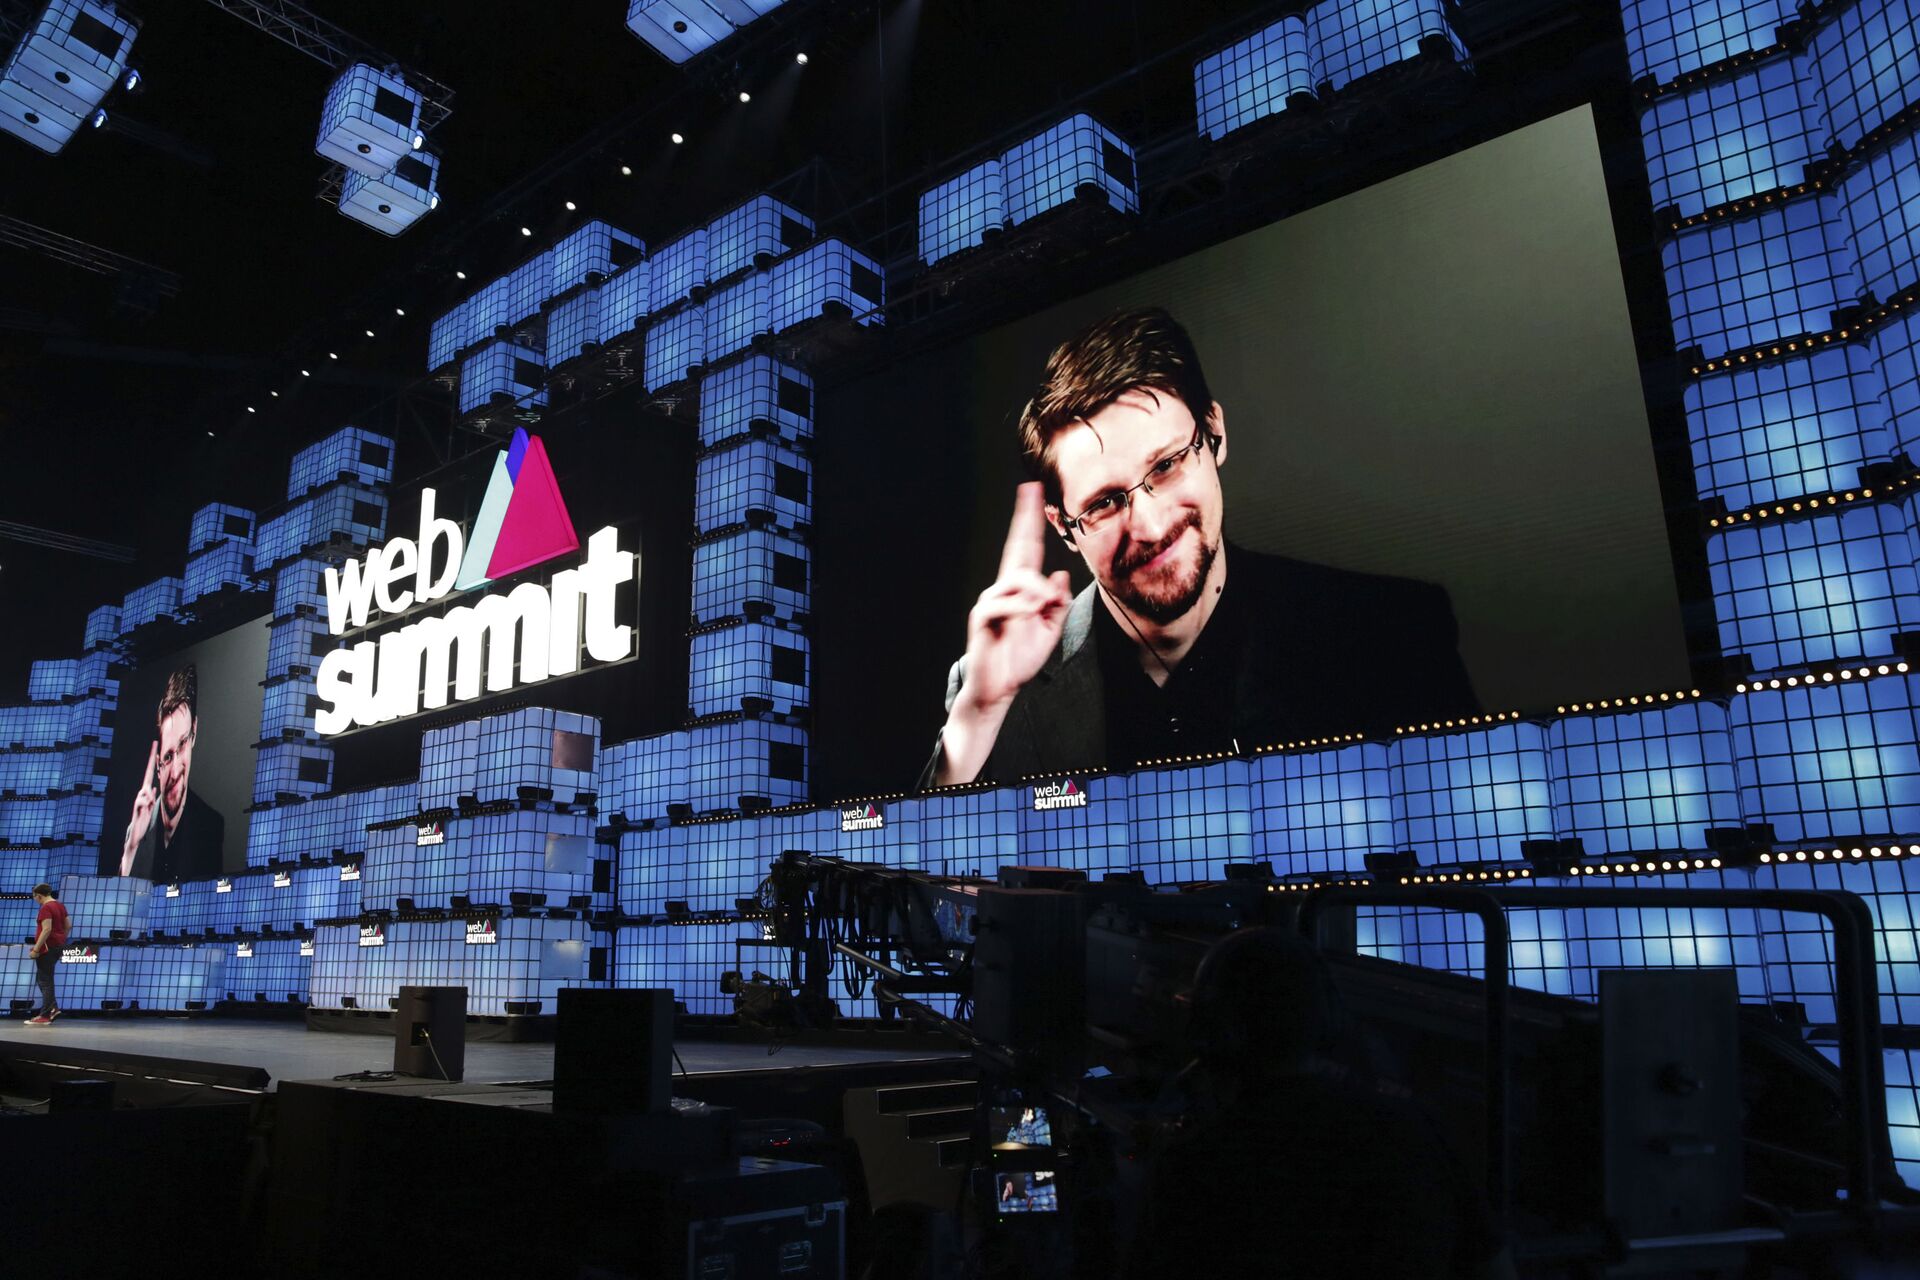 Former U.S. National Security Agency contractor Edward Snowden addresses attendees through video link at the Web Summit technology conference in Lisbon, Monday, Nov. 4, 2019. Snowden has been living in Russia to escape U.S. prosecution after leaking classified documents detailing government surveillance programs - Sputnik International, 1920, 07.09.2021